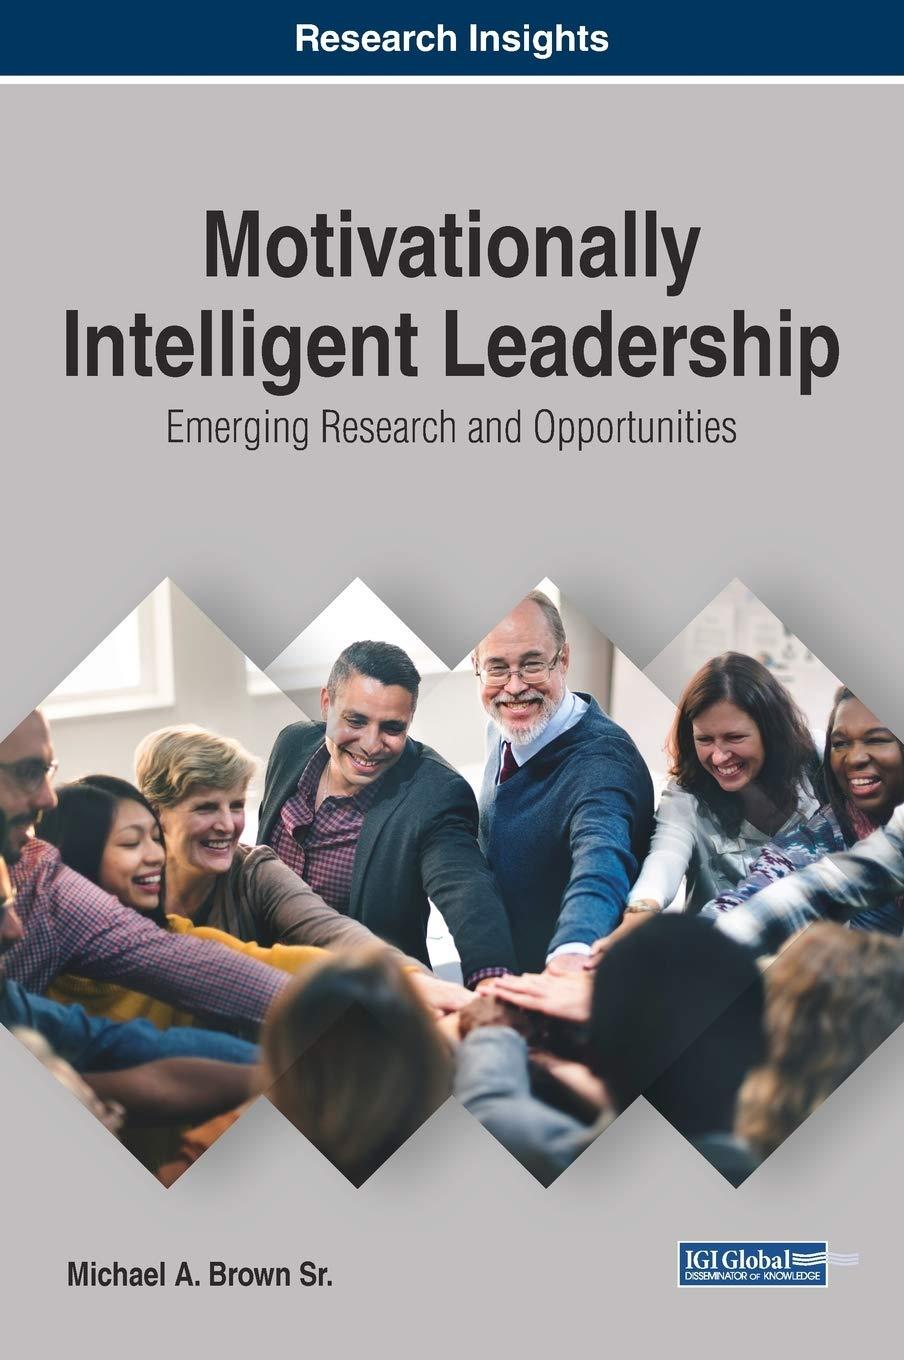 motivationally intelligent leadership emerging research and opportunities 1st edition michael a. brown sr.